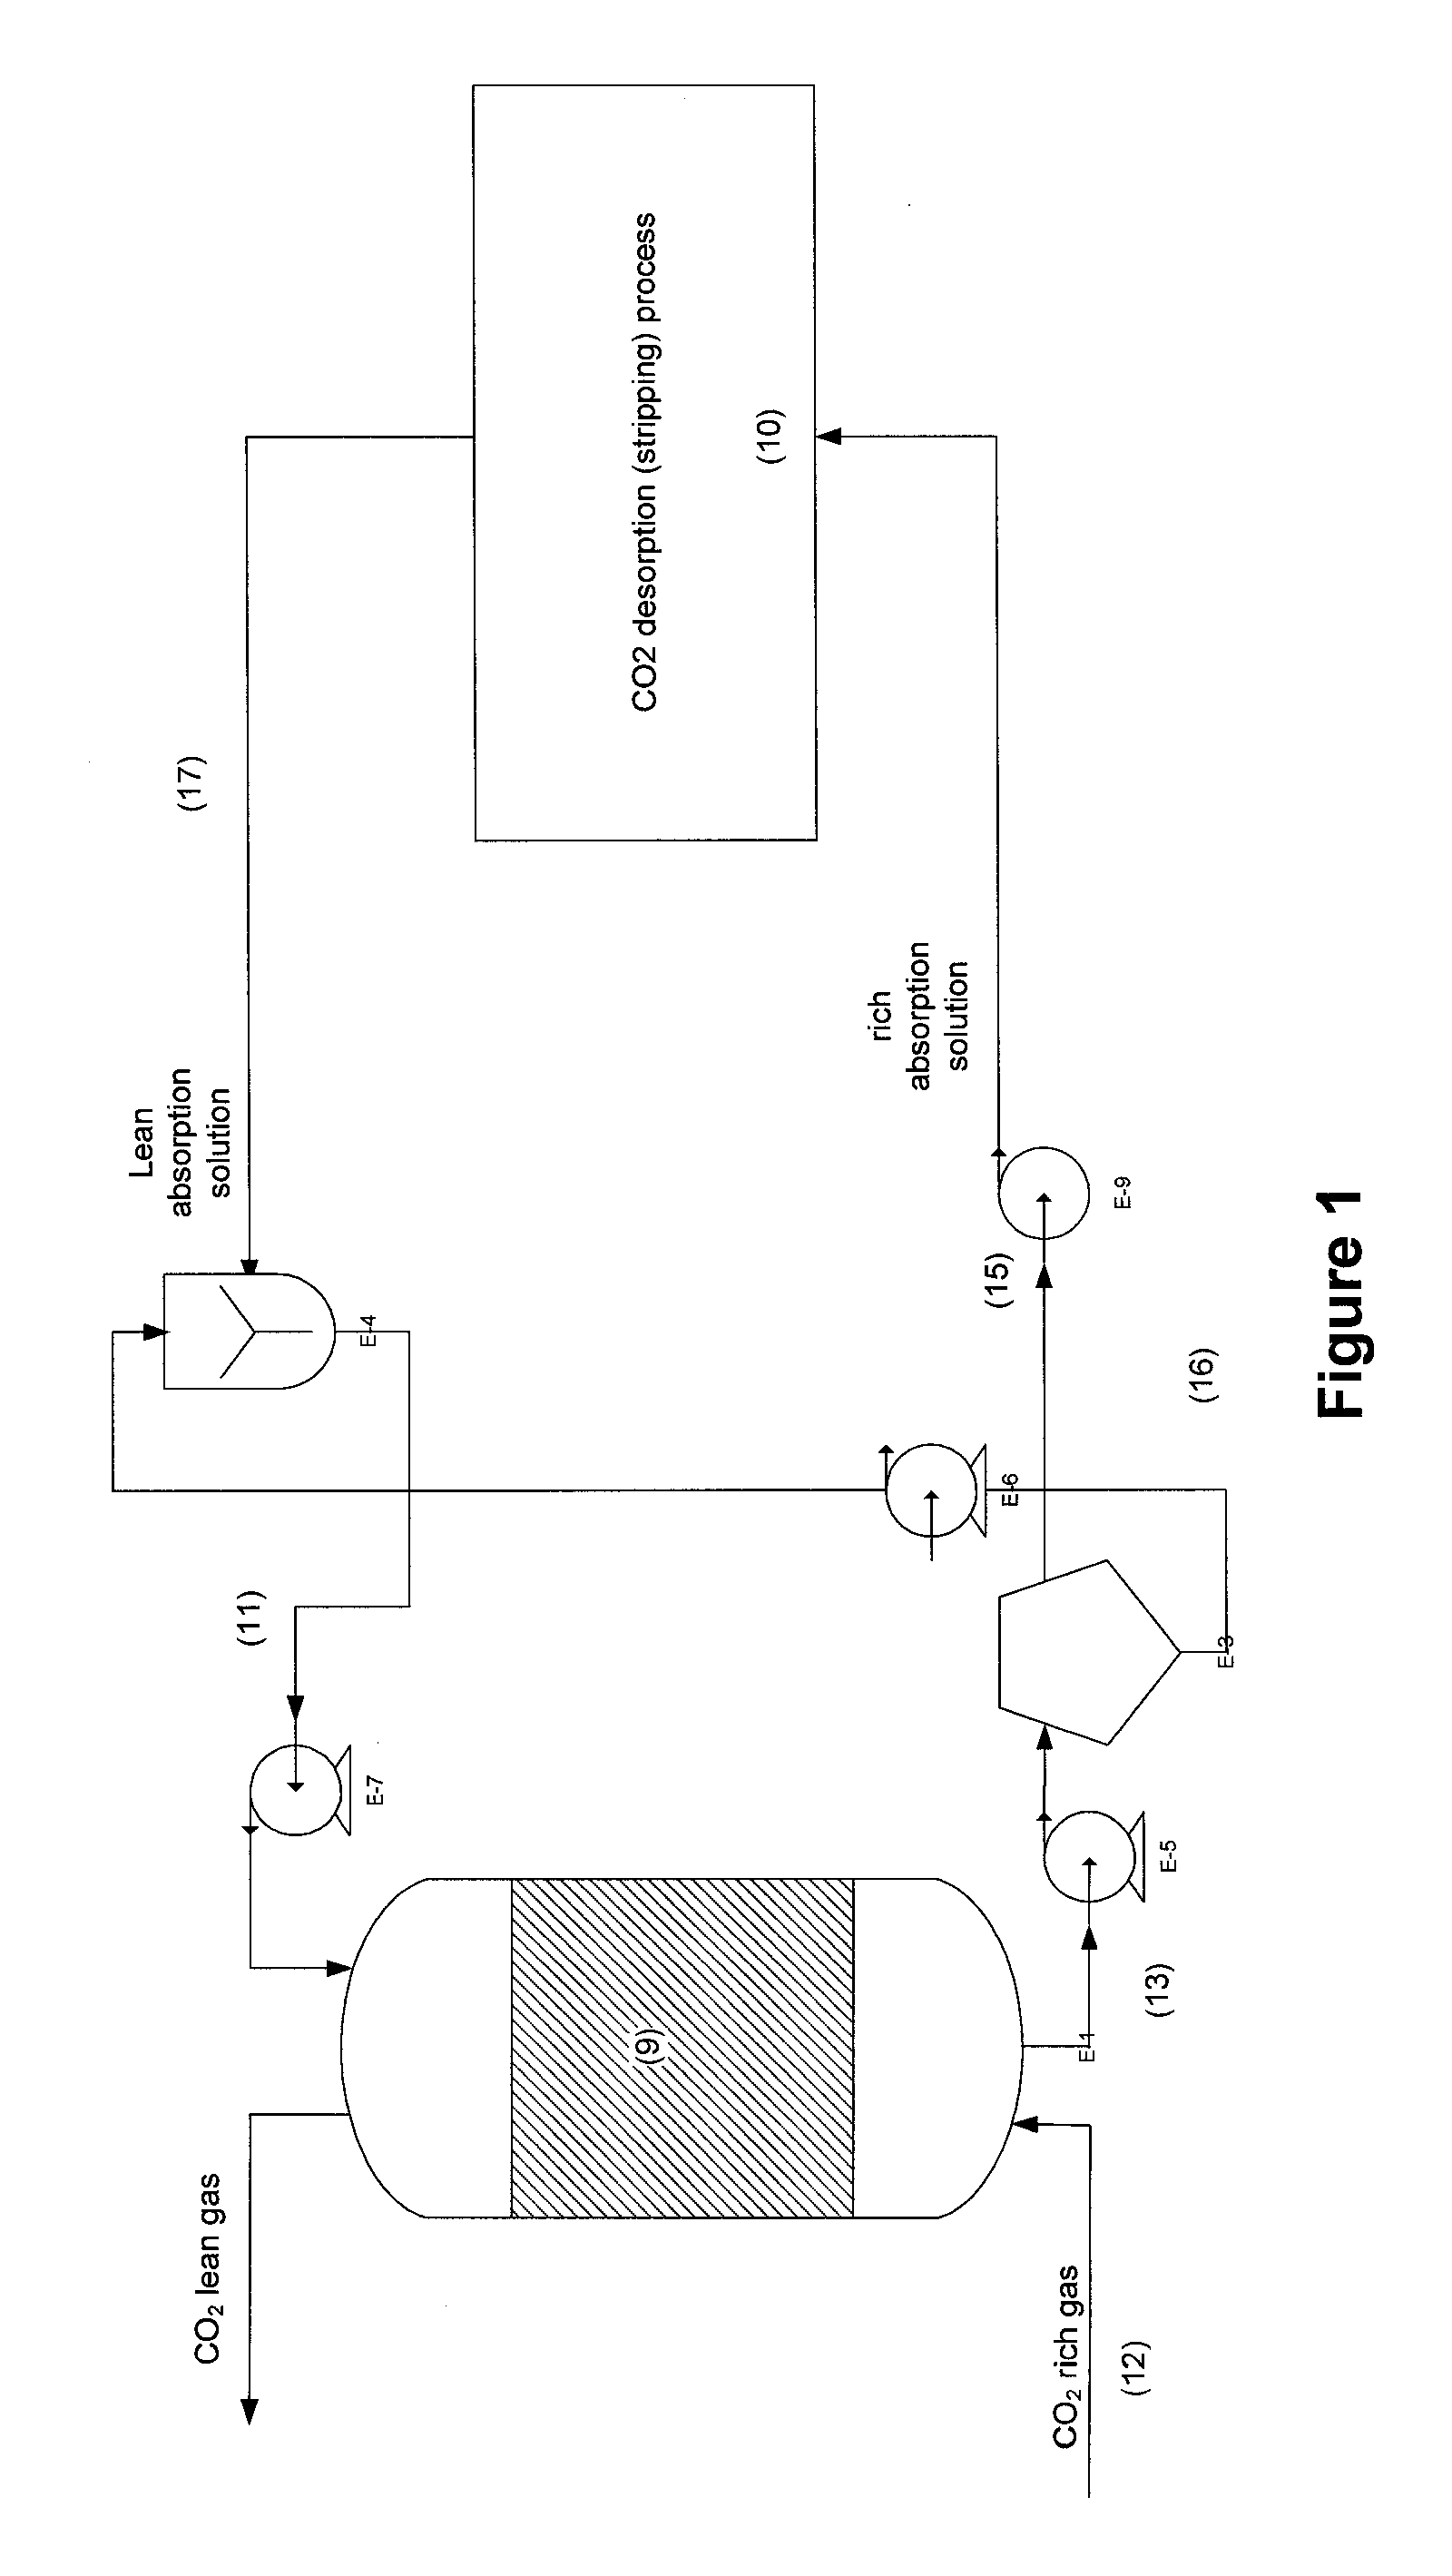 Formulation and process for co2 capture using carbonates and biocatalysts